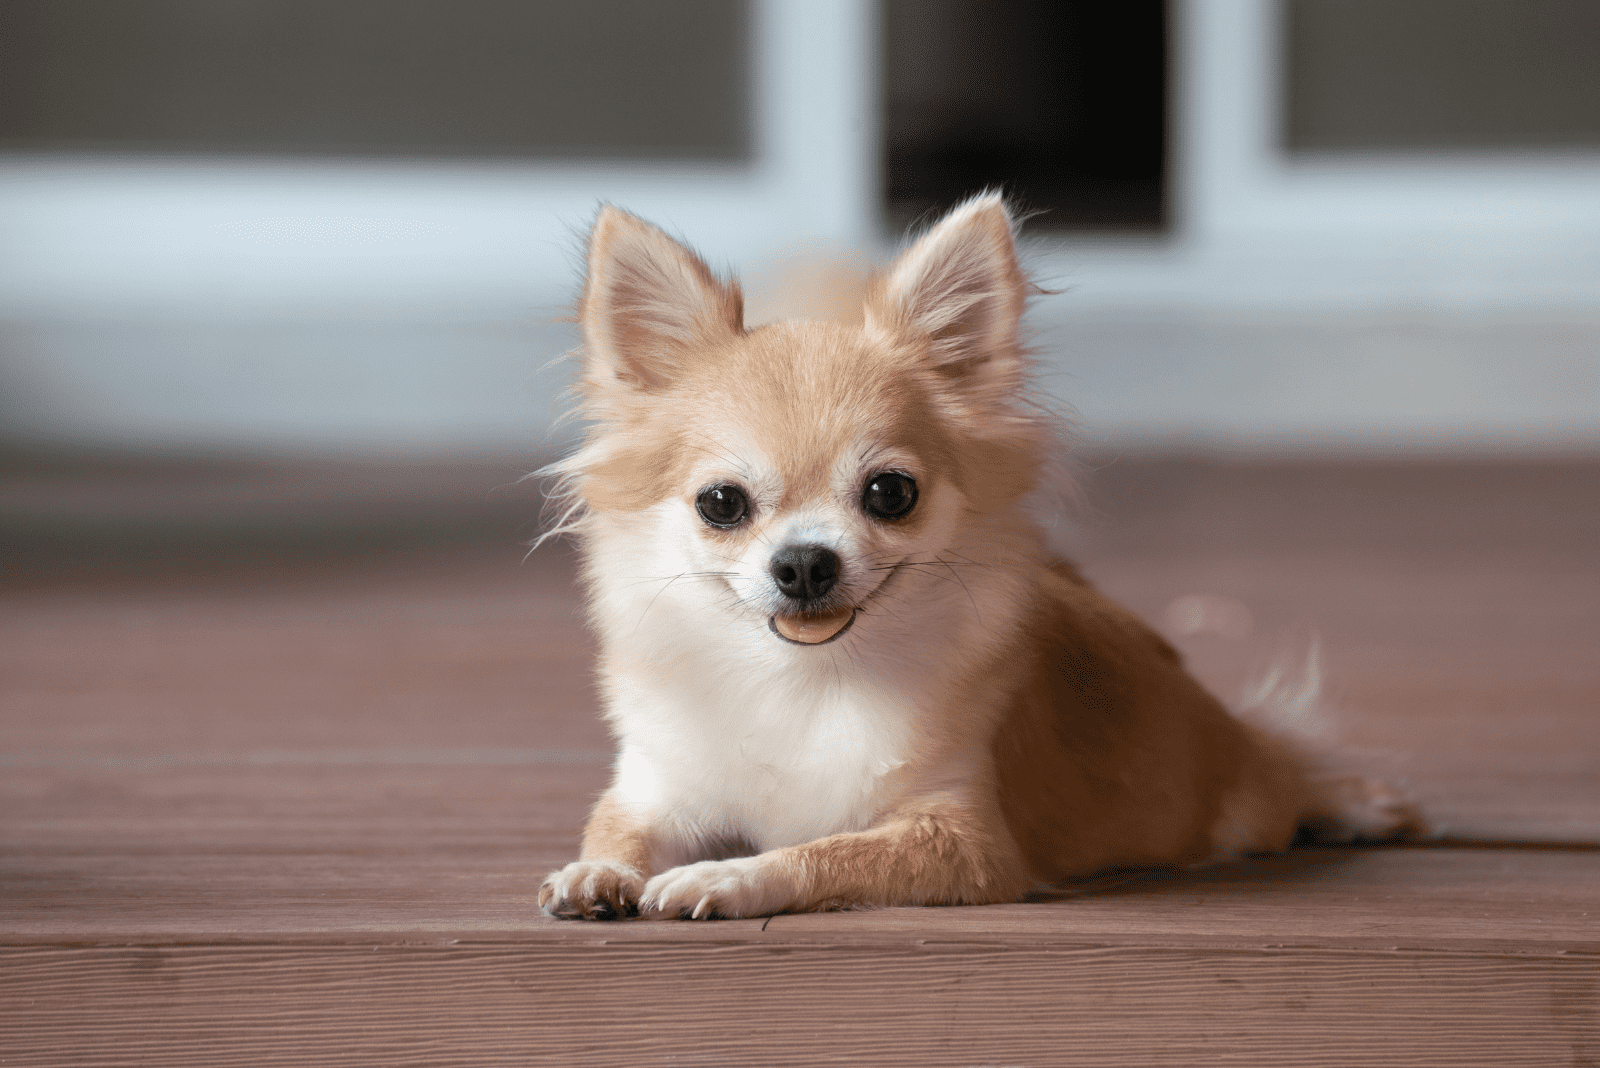 Chihuahua sitting on the floor